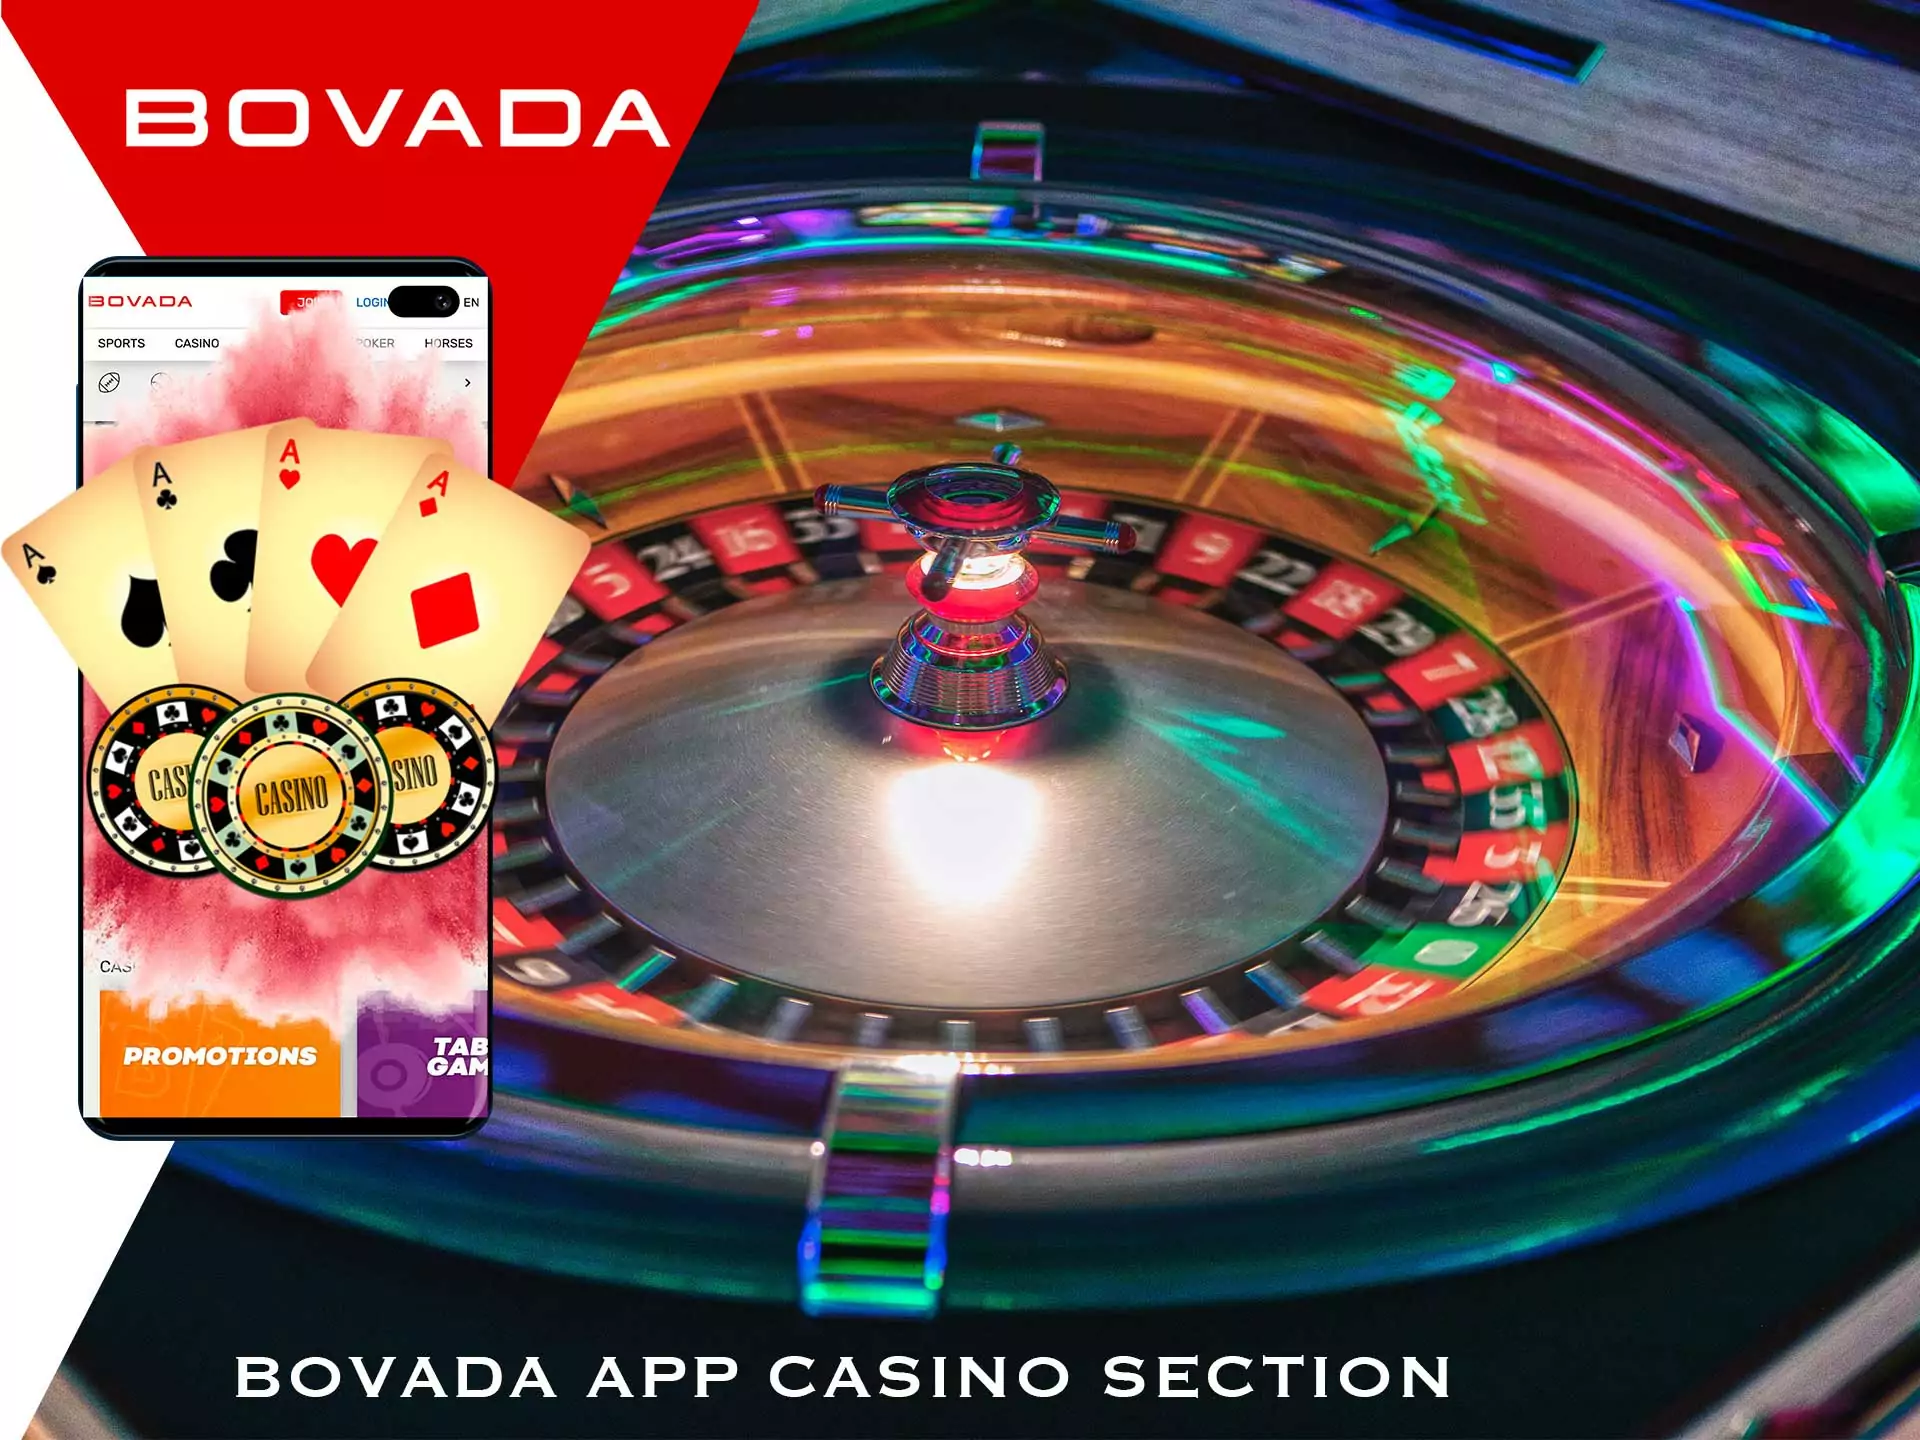 Bovada is also featured as a gambling app.